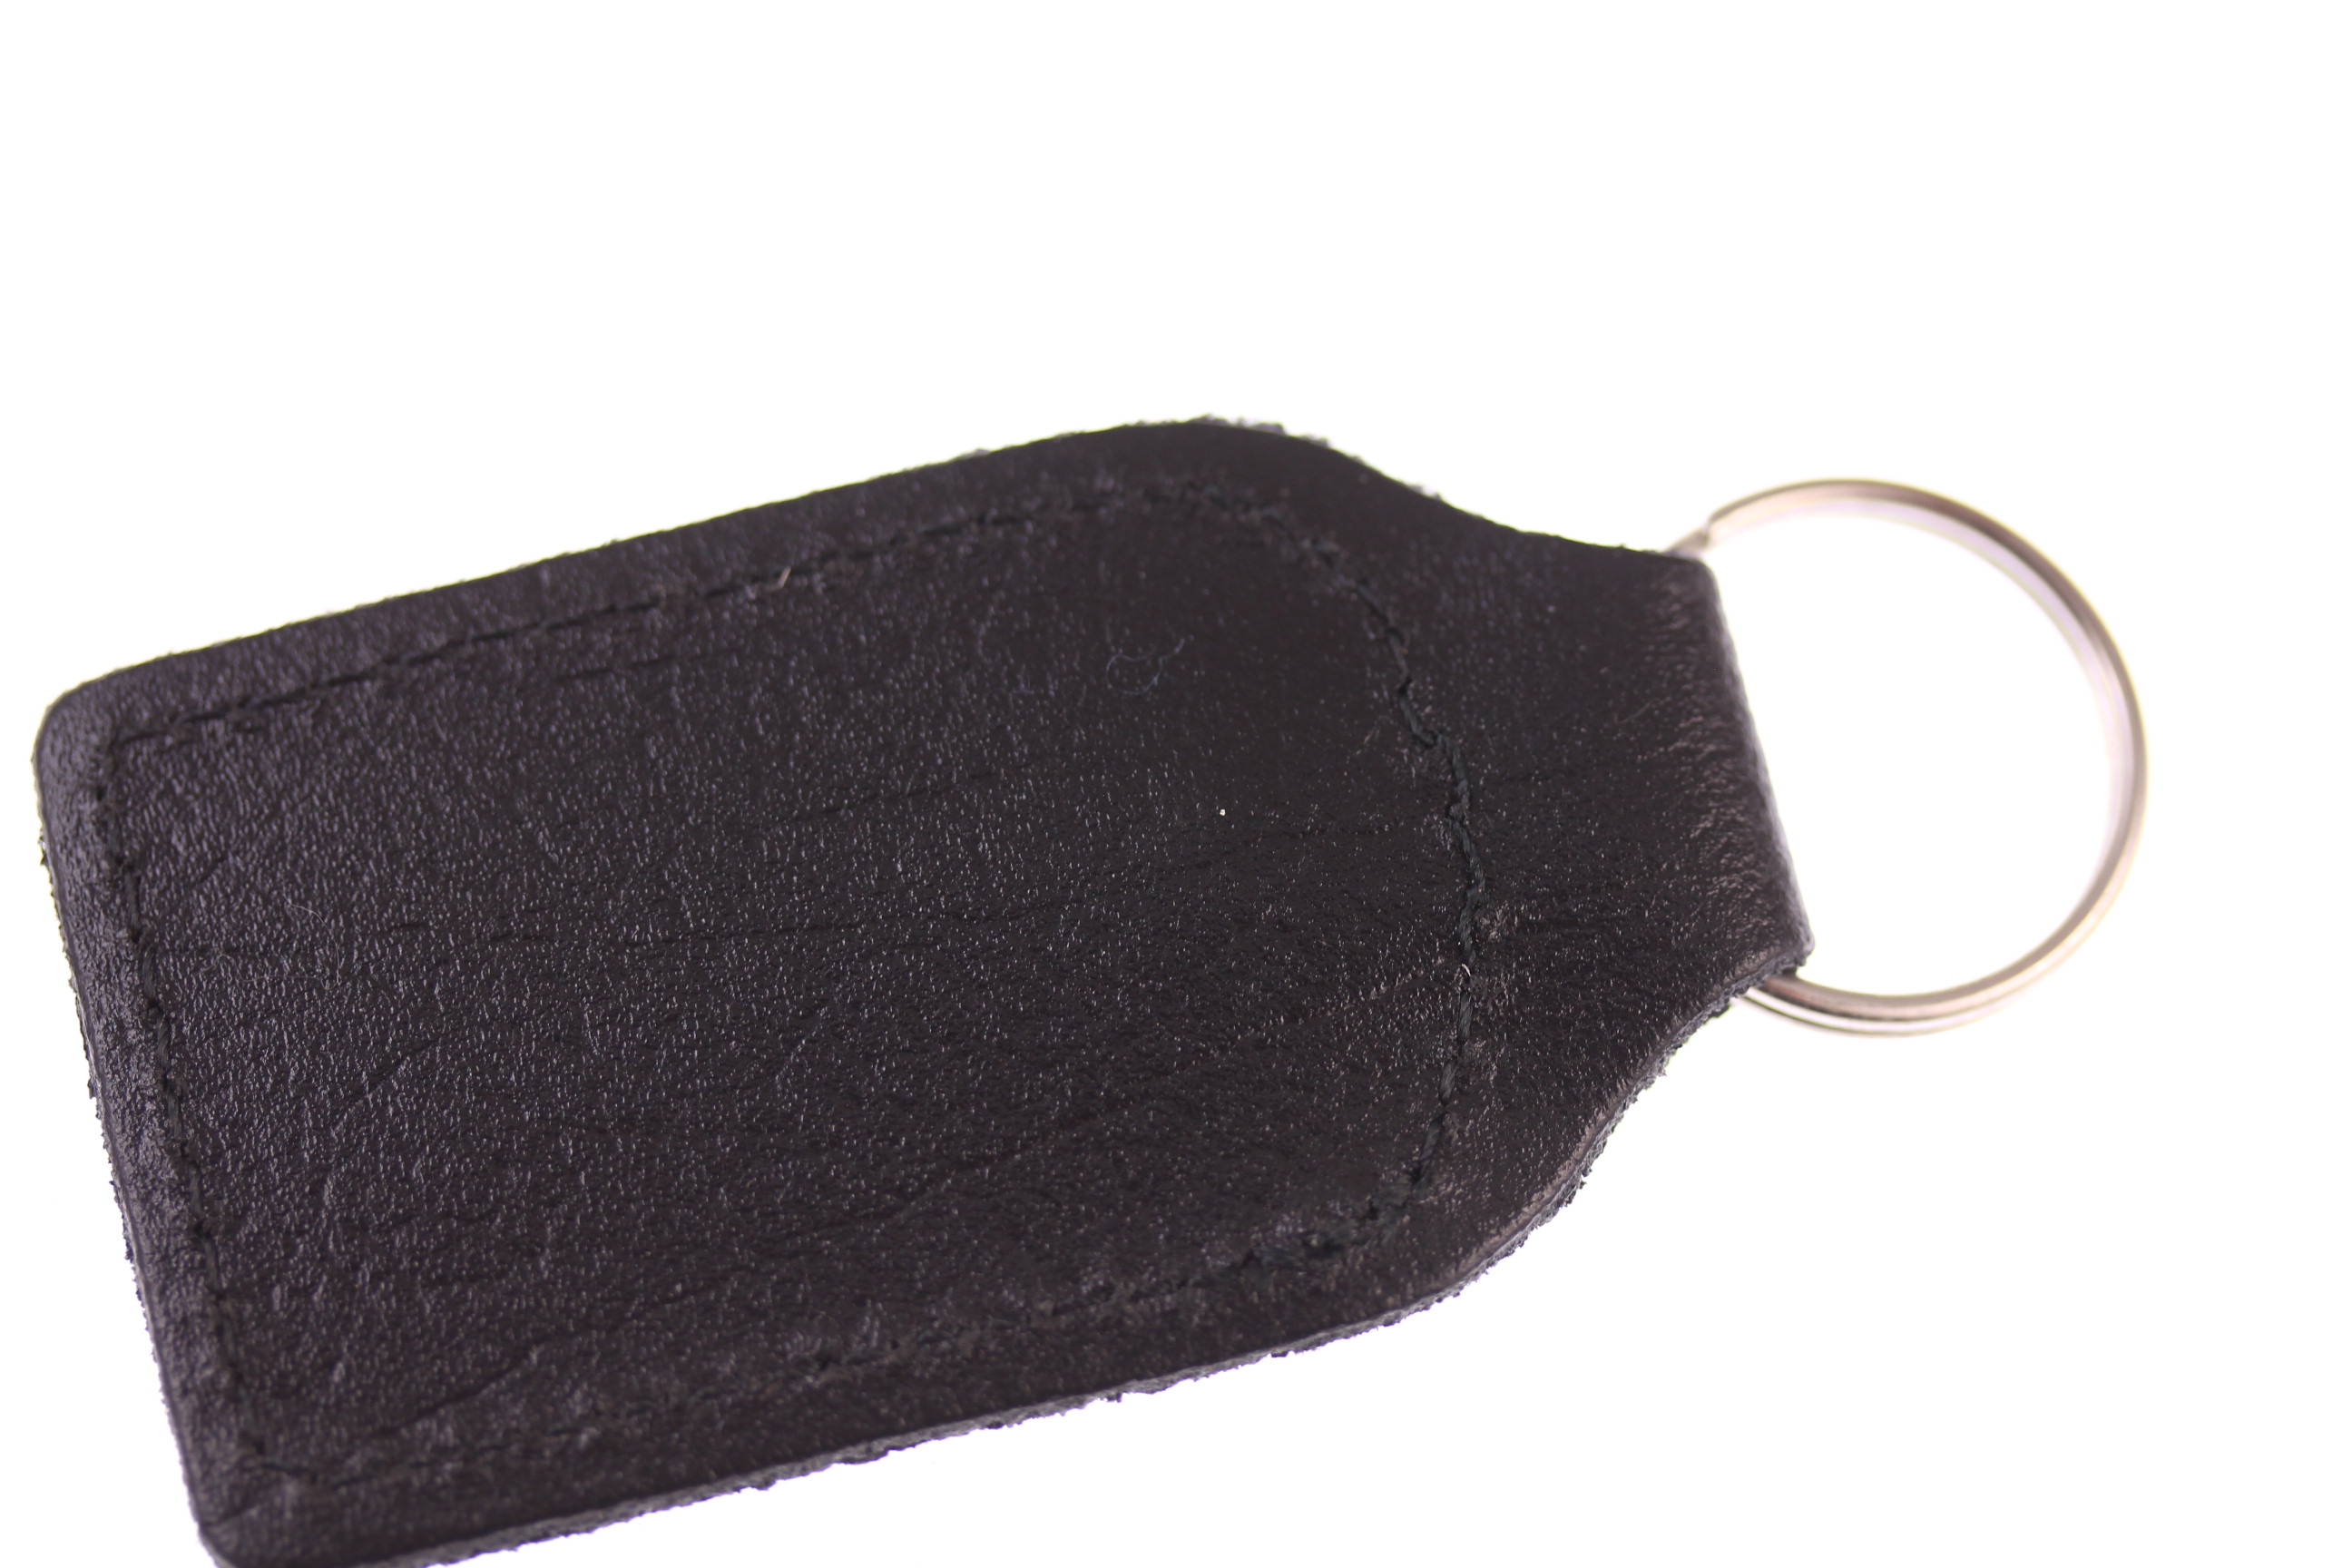 Jeep – original early 2000s? keyring – Classic Leather Fobs